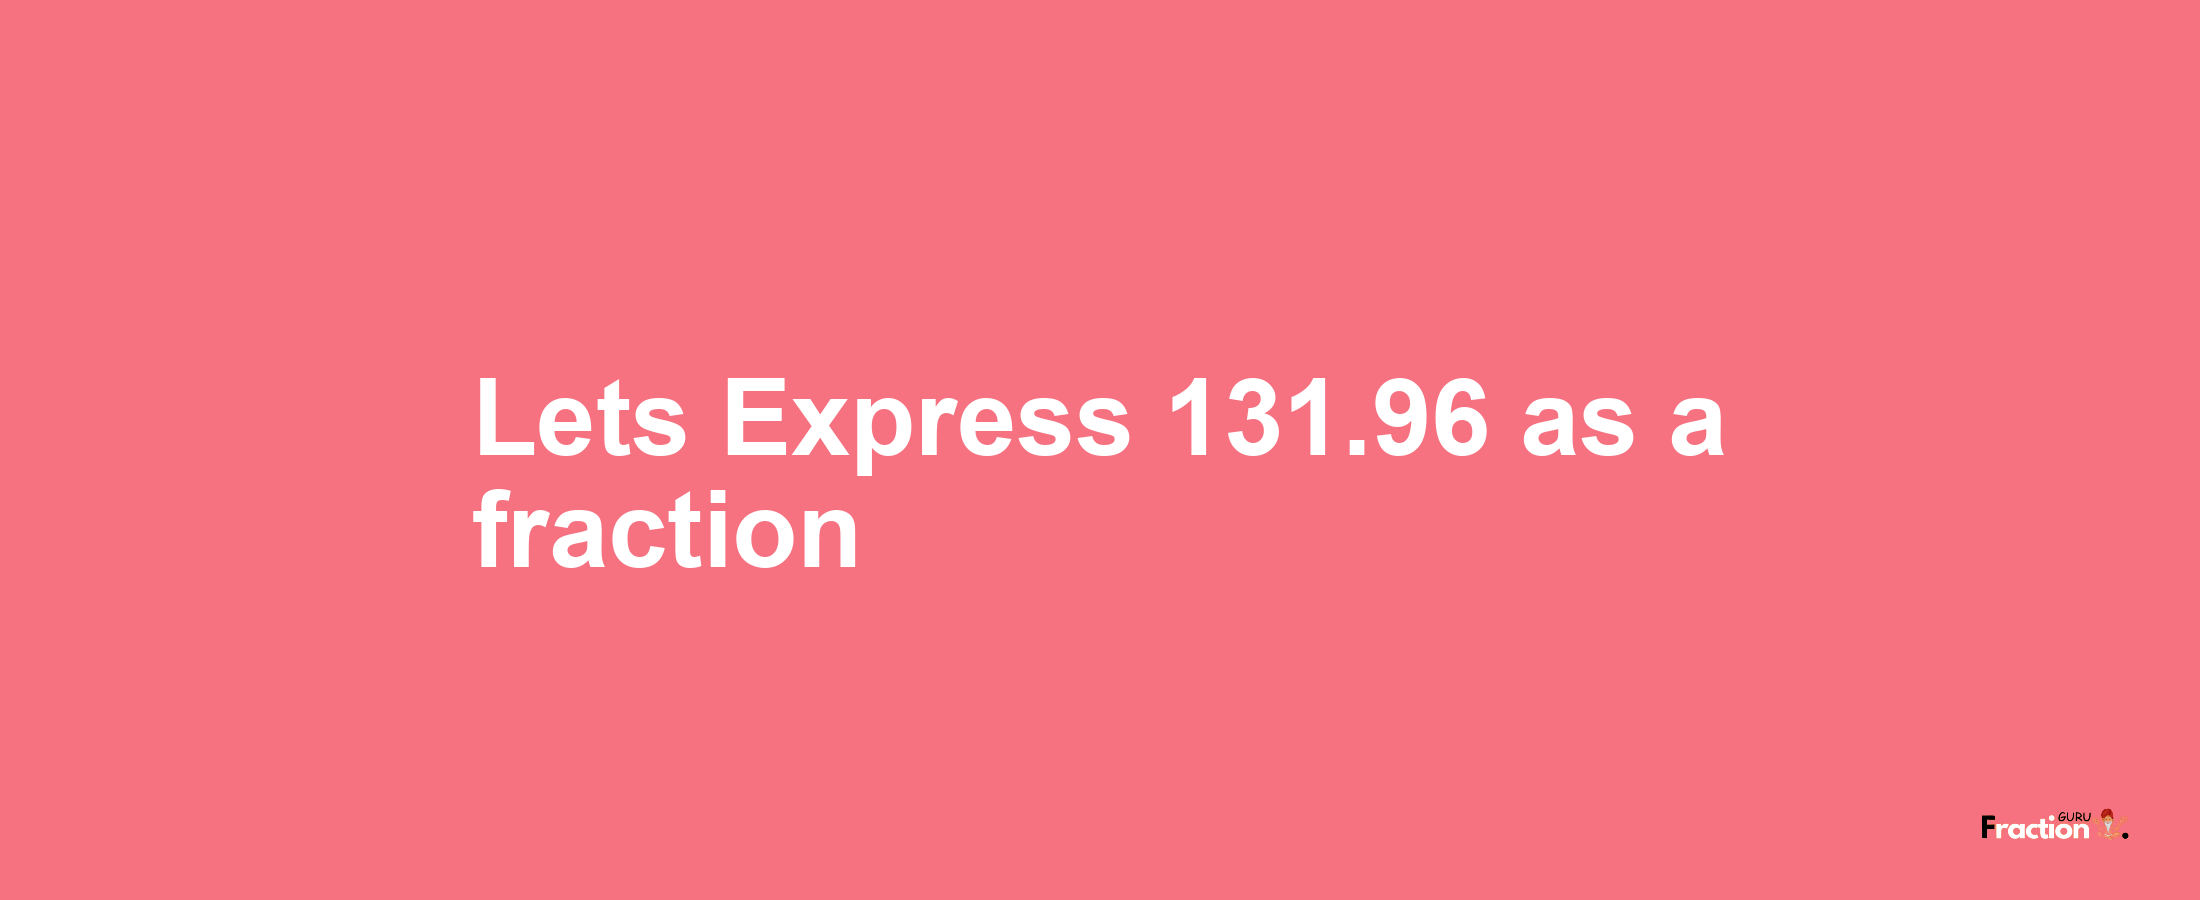 Lets Express 131.96 as afraction